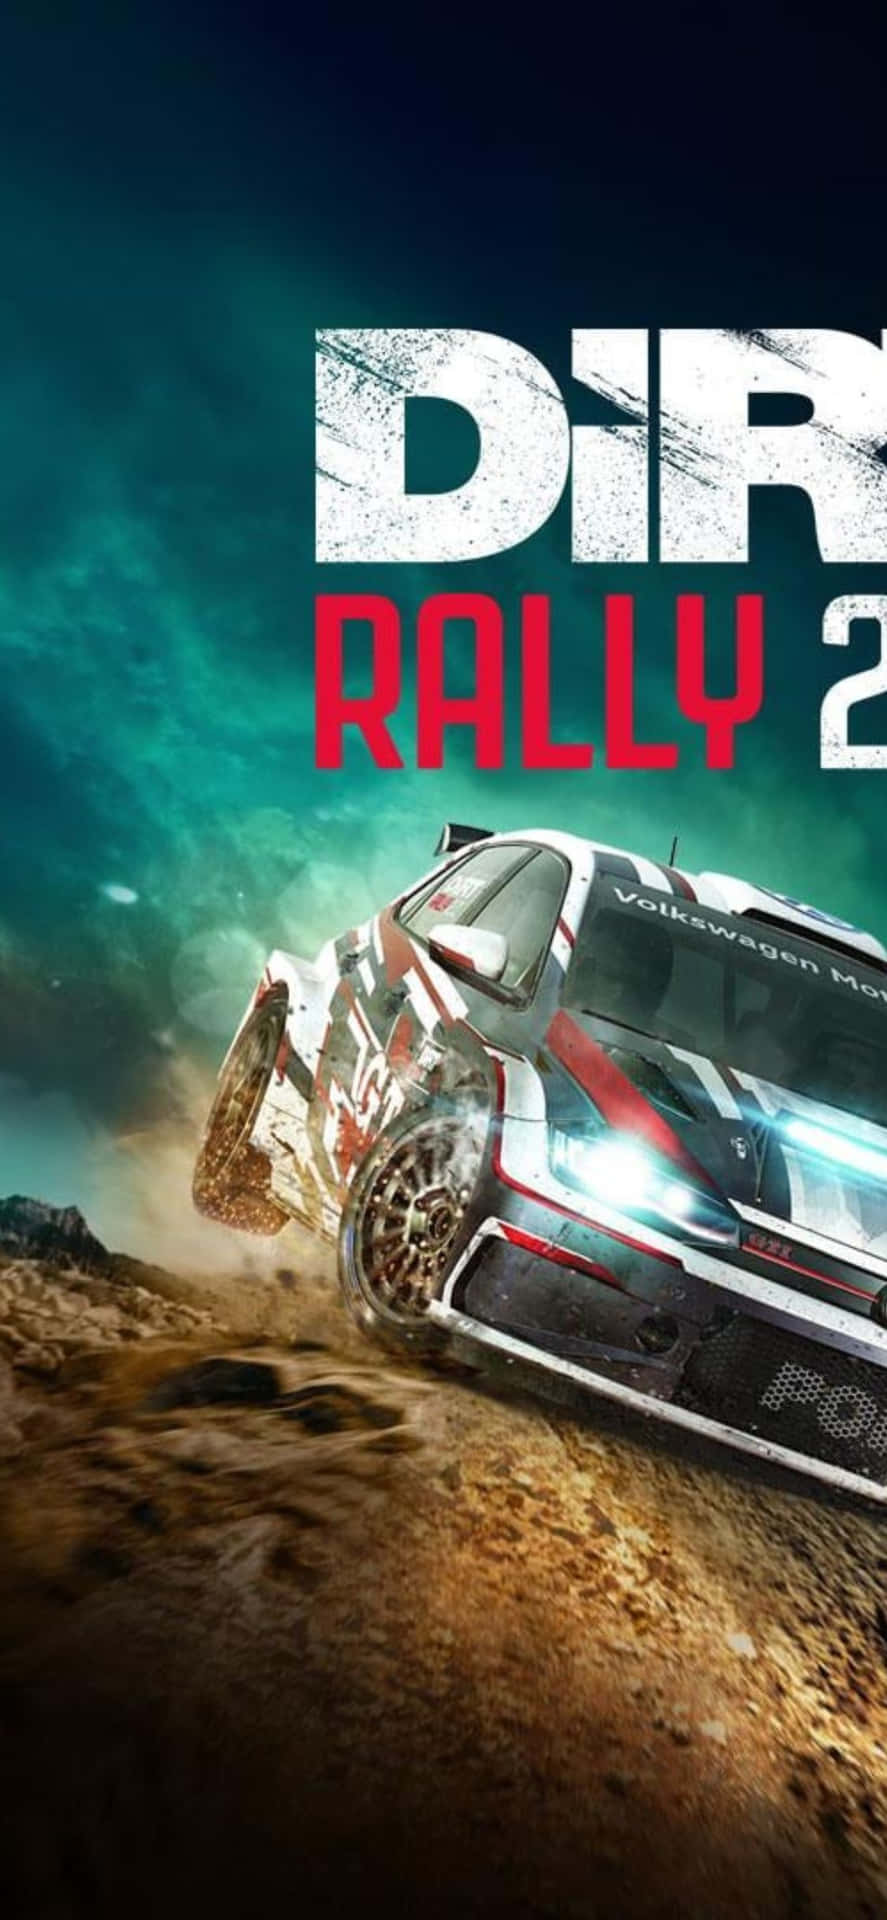 Experience Thrill and Excitement with the Iphone X Dirt Rally